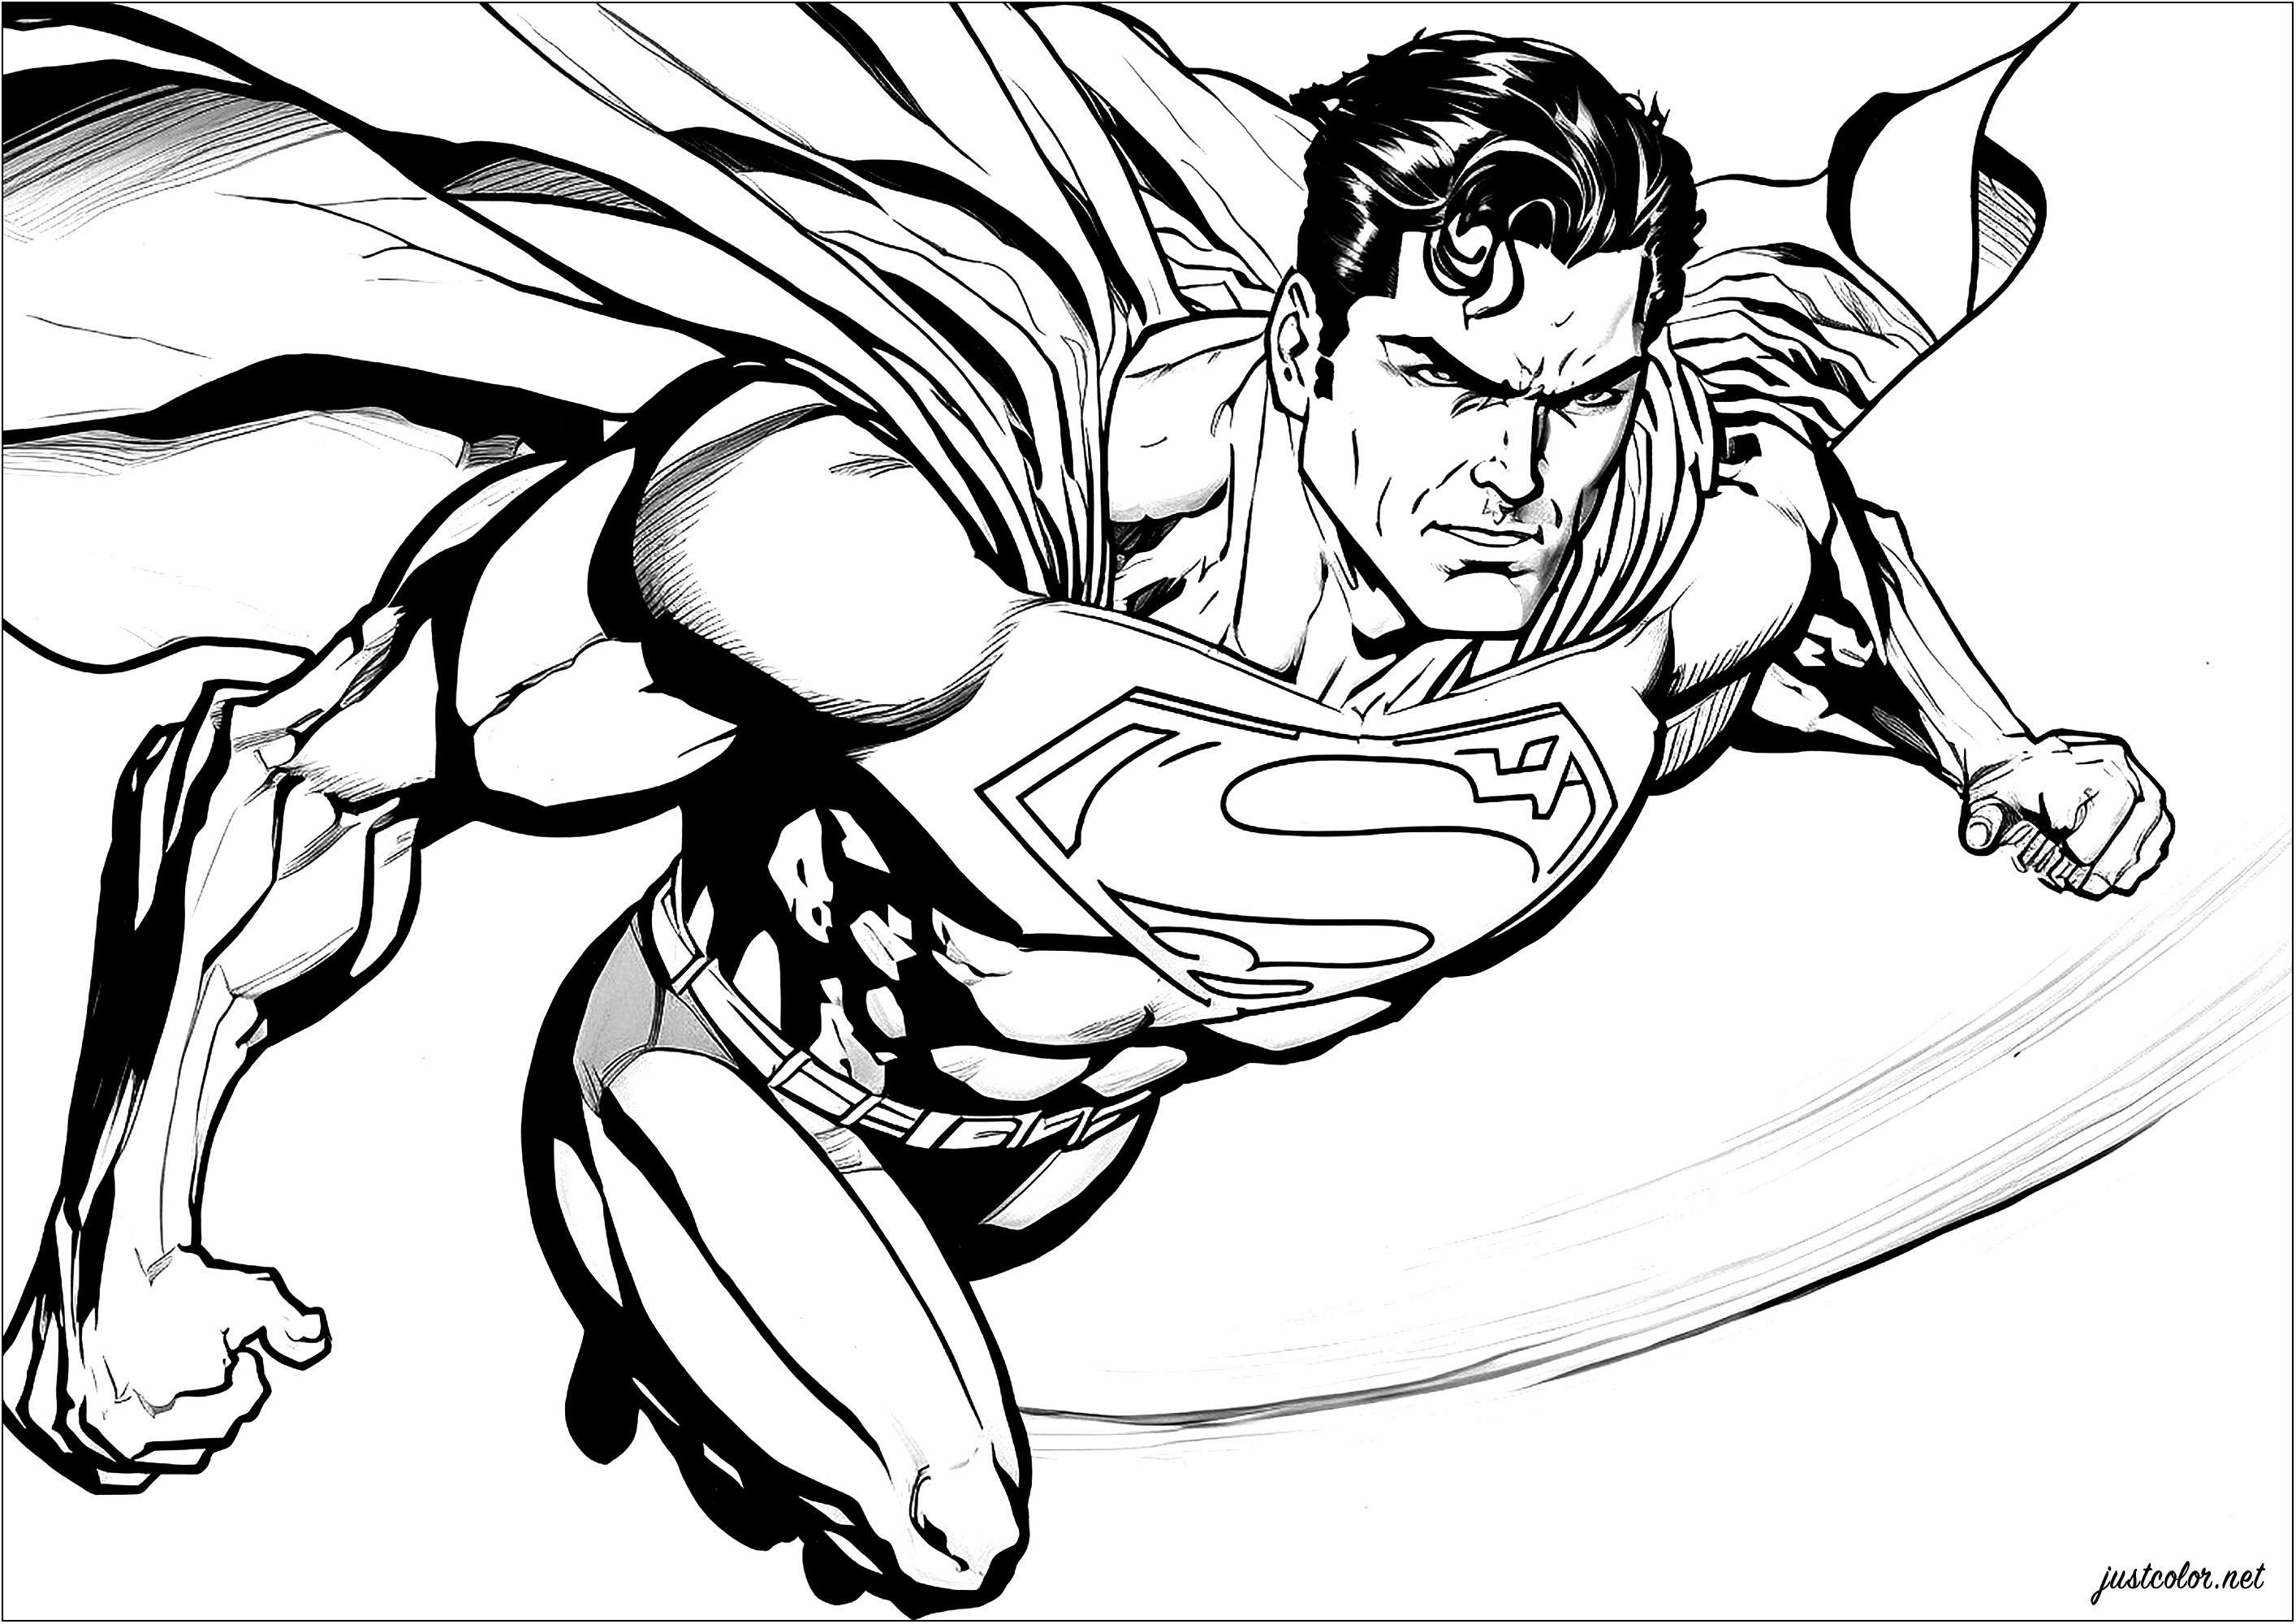 Superman in full flight, cape in the wind. This coloring page represents Superman flying. We see the superhero, dressed in his costume (soon to be red and blue thanks to you), flying in the sky, with an expression of determination on his face.